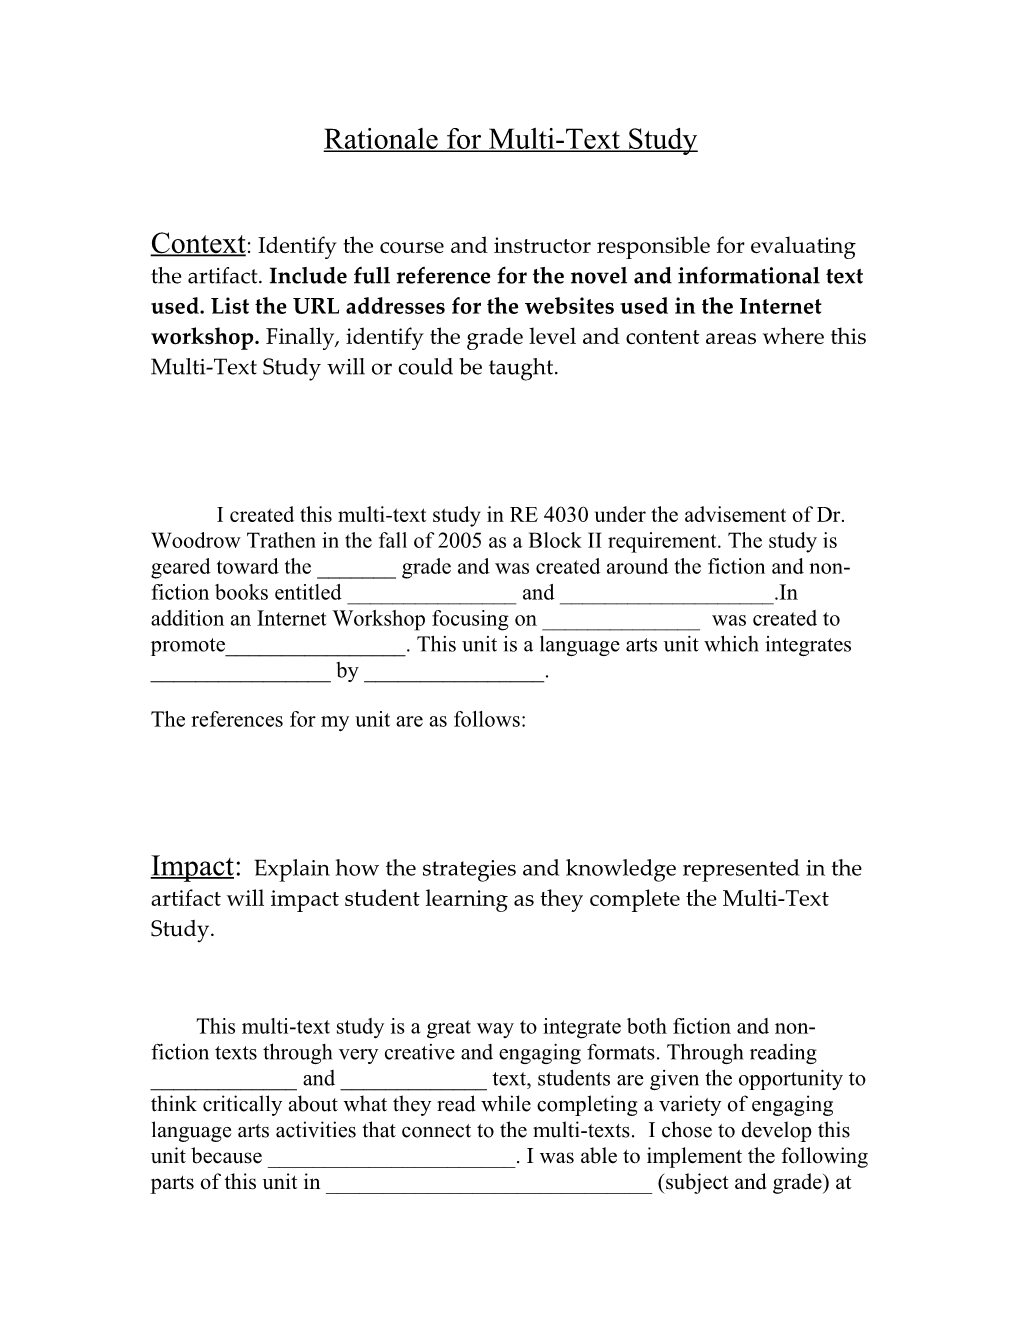 Rationale for Multi-Text Study